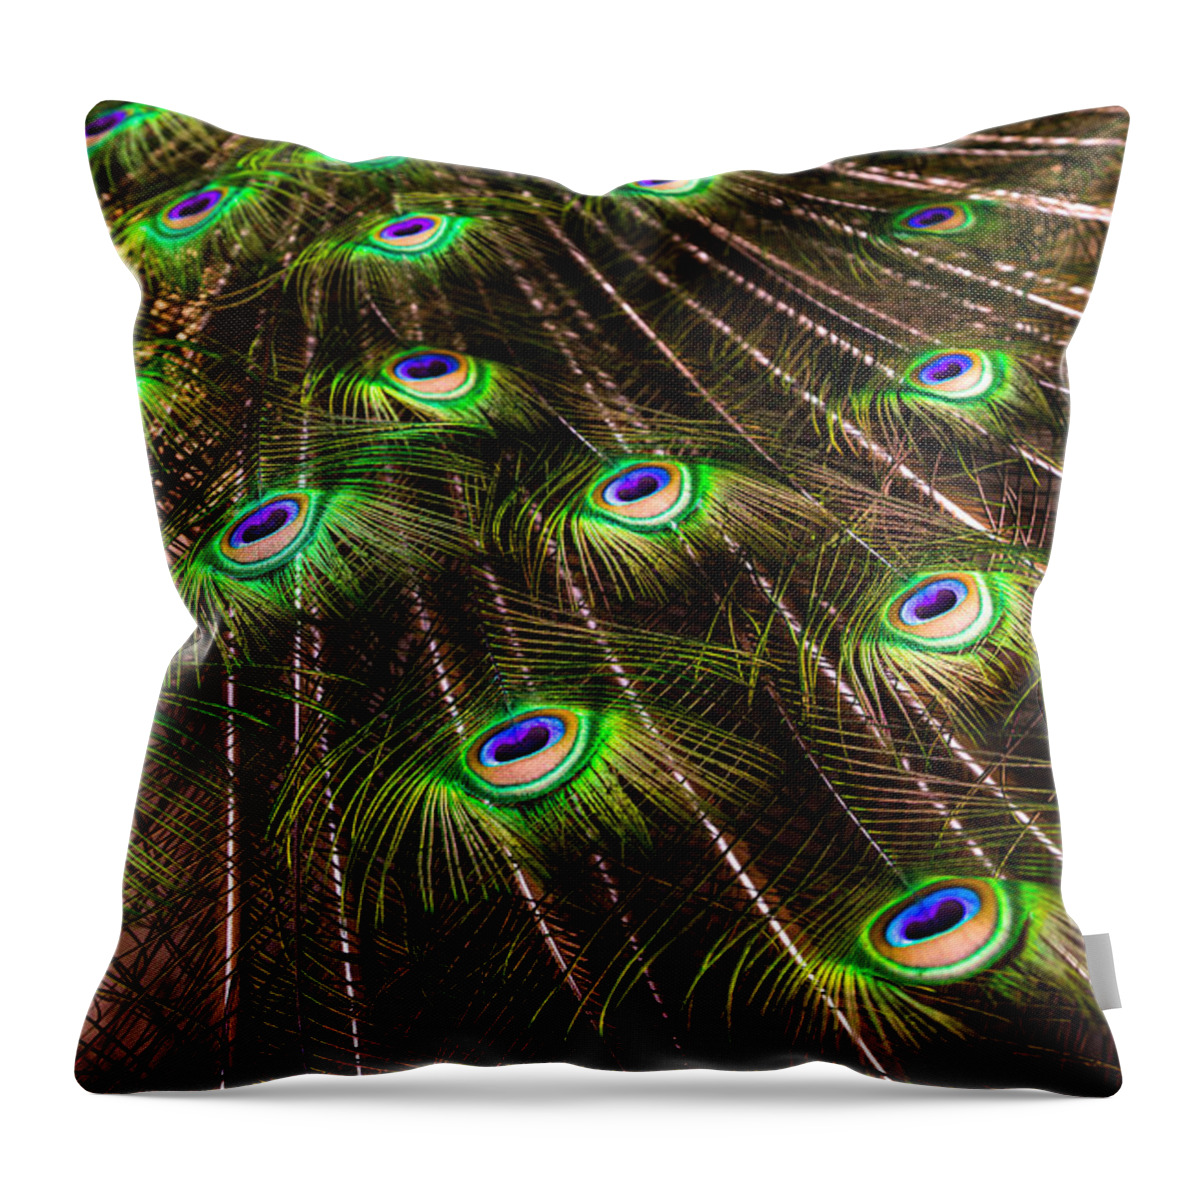 Peacock Feathers Throw Pillow featuring the photograph Nature Abstracts by Karen Wiles